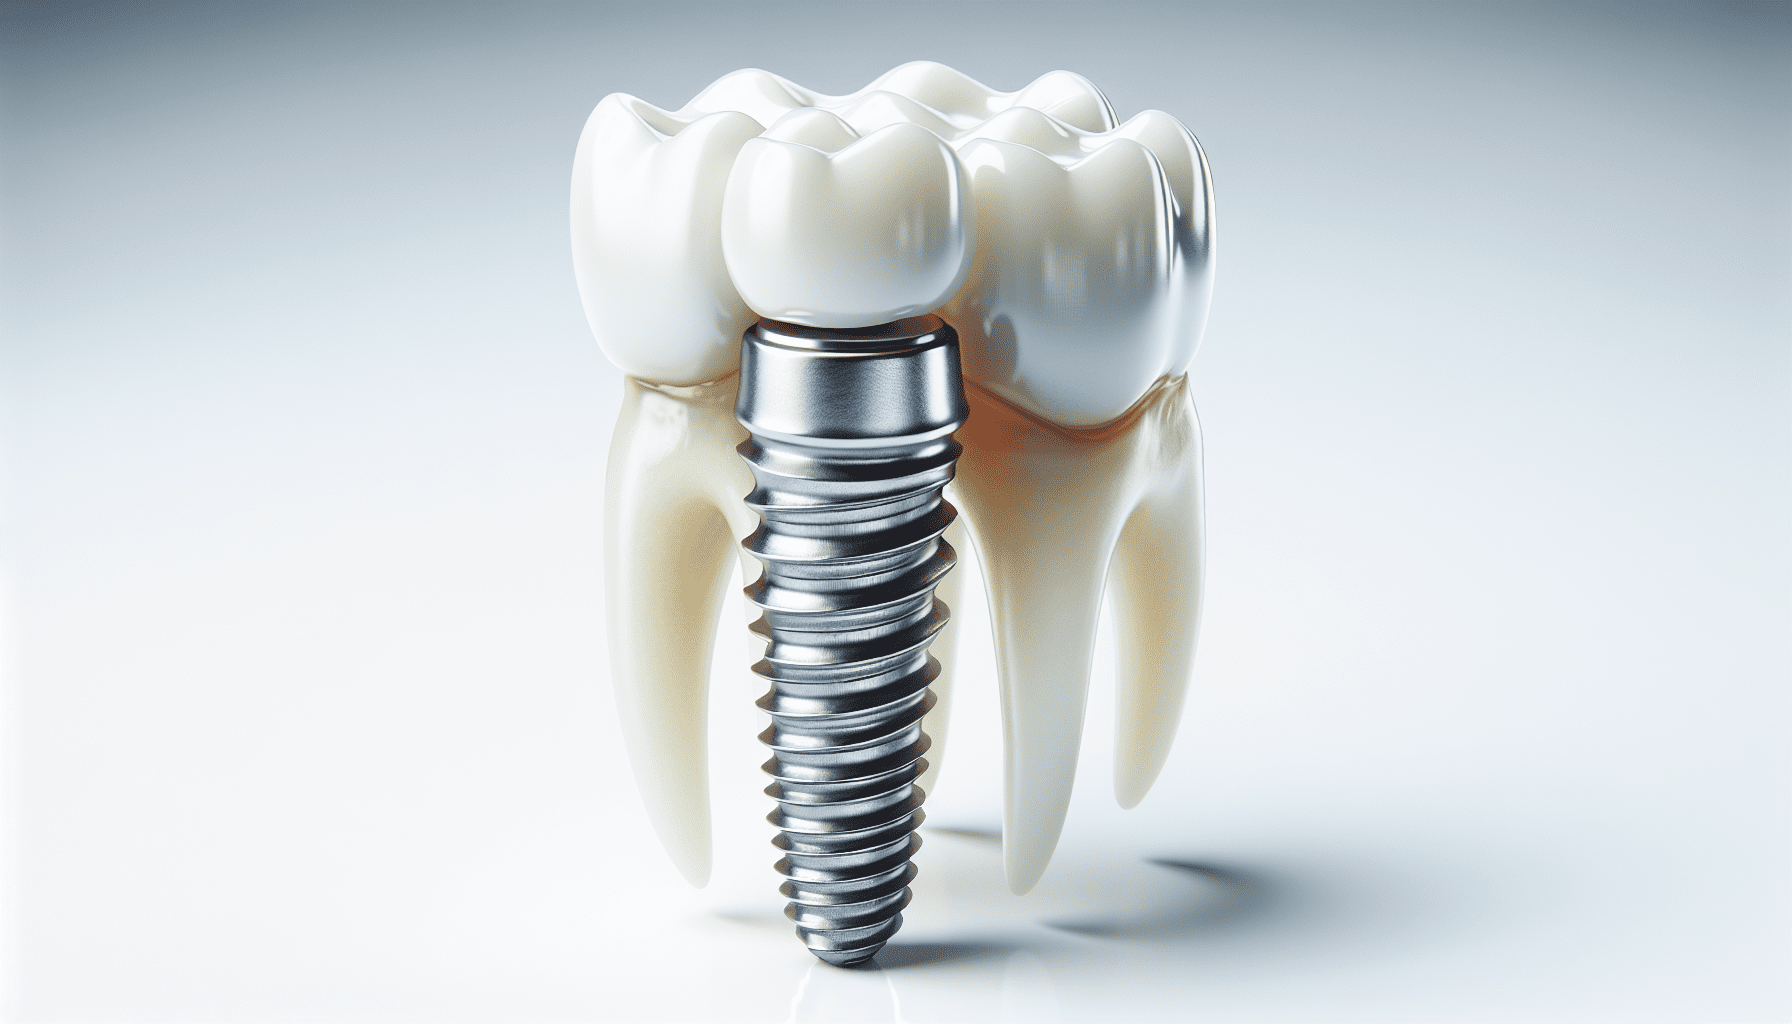 Dental Implants: A Permanent Solution for Missing Teeth